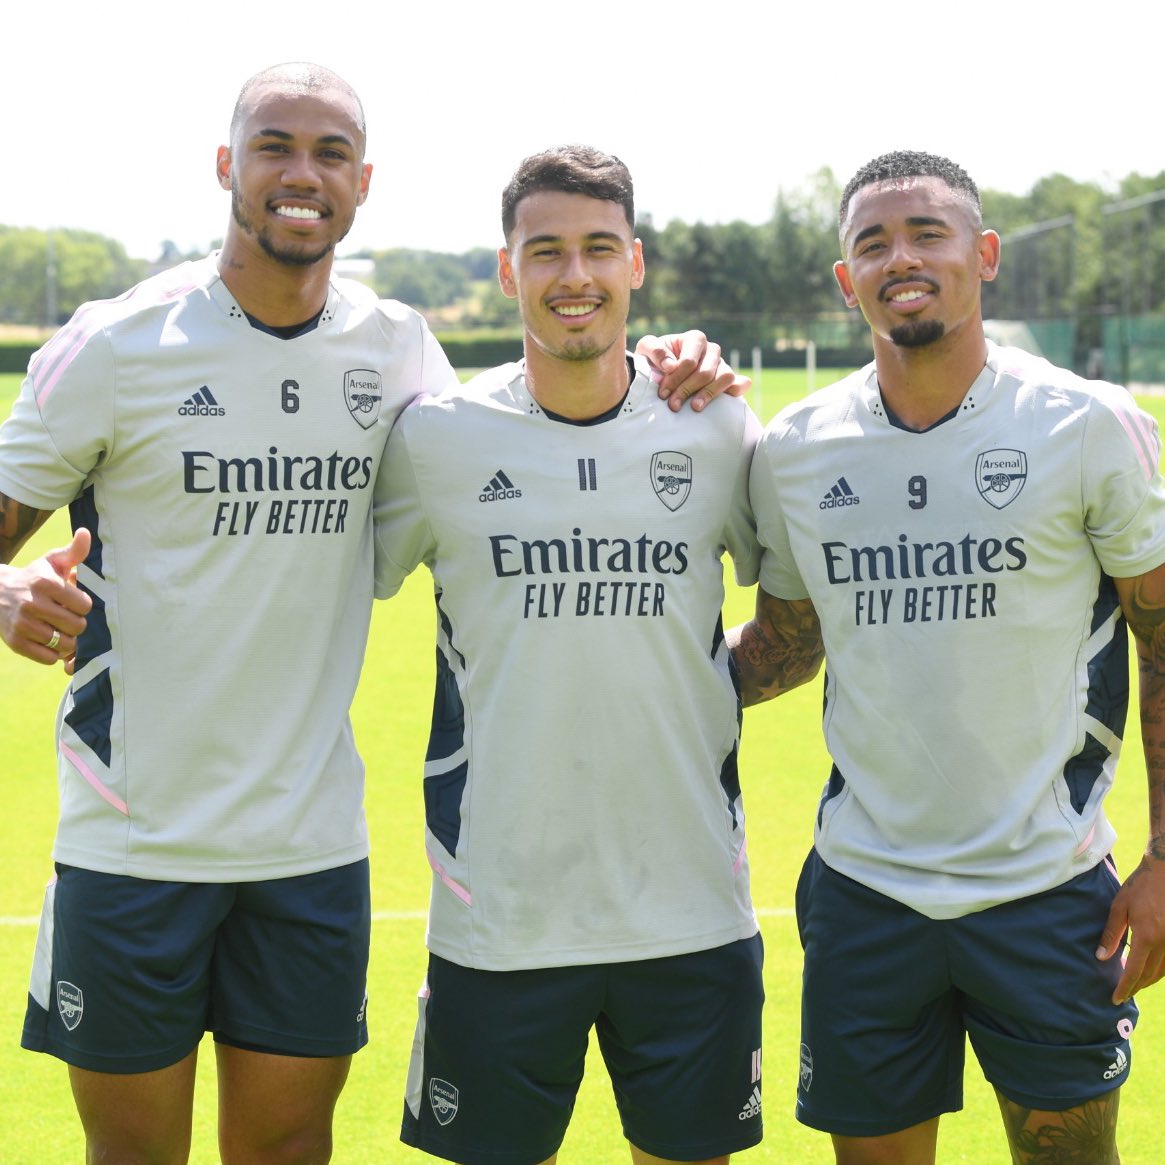 Gabriel Magalhães, Gabriel Martinelli, and Gabriel Jesus standing together in
white Arsenal training tops